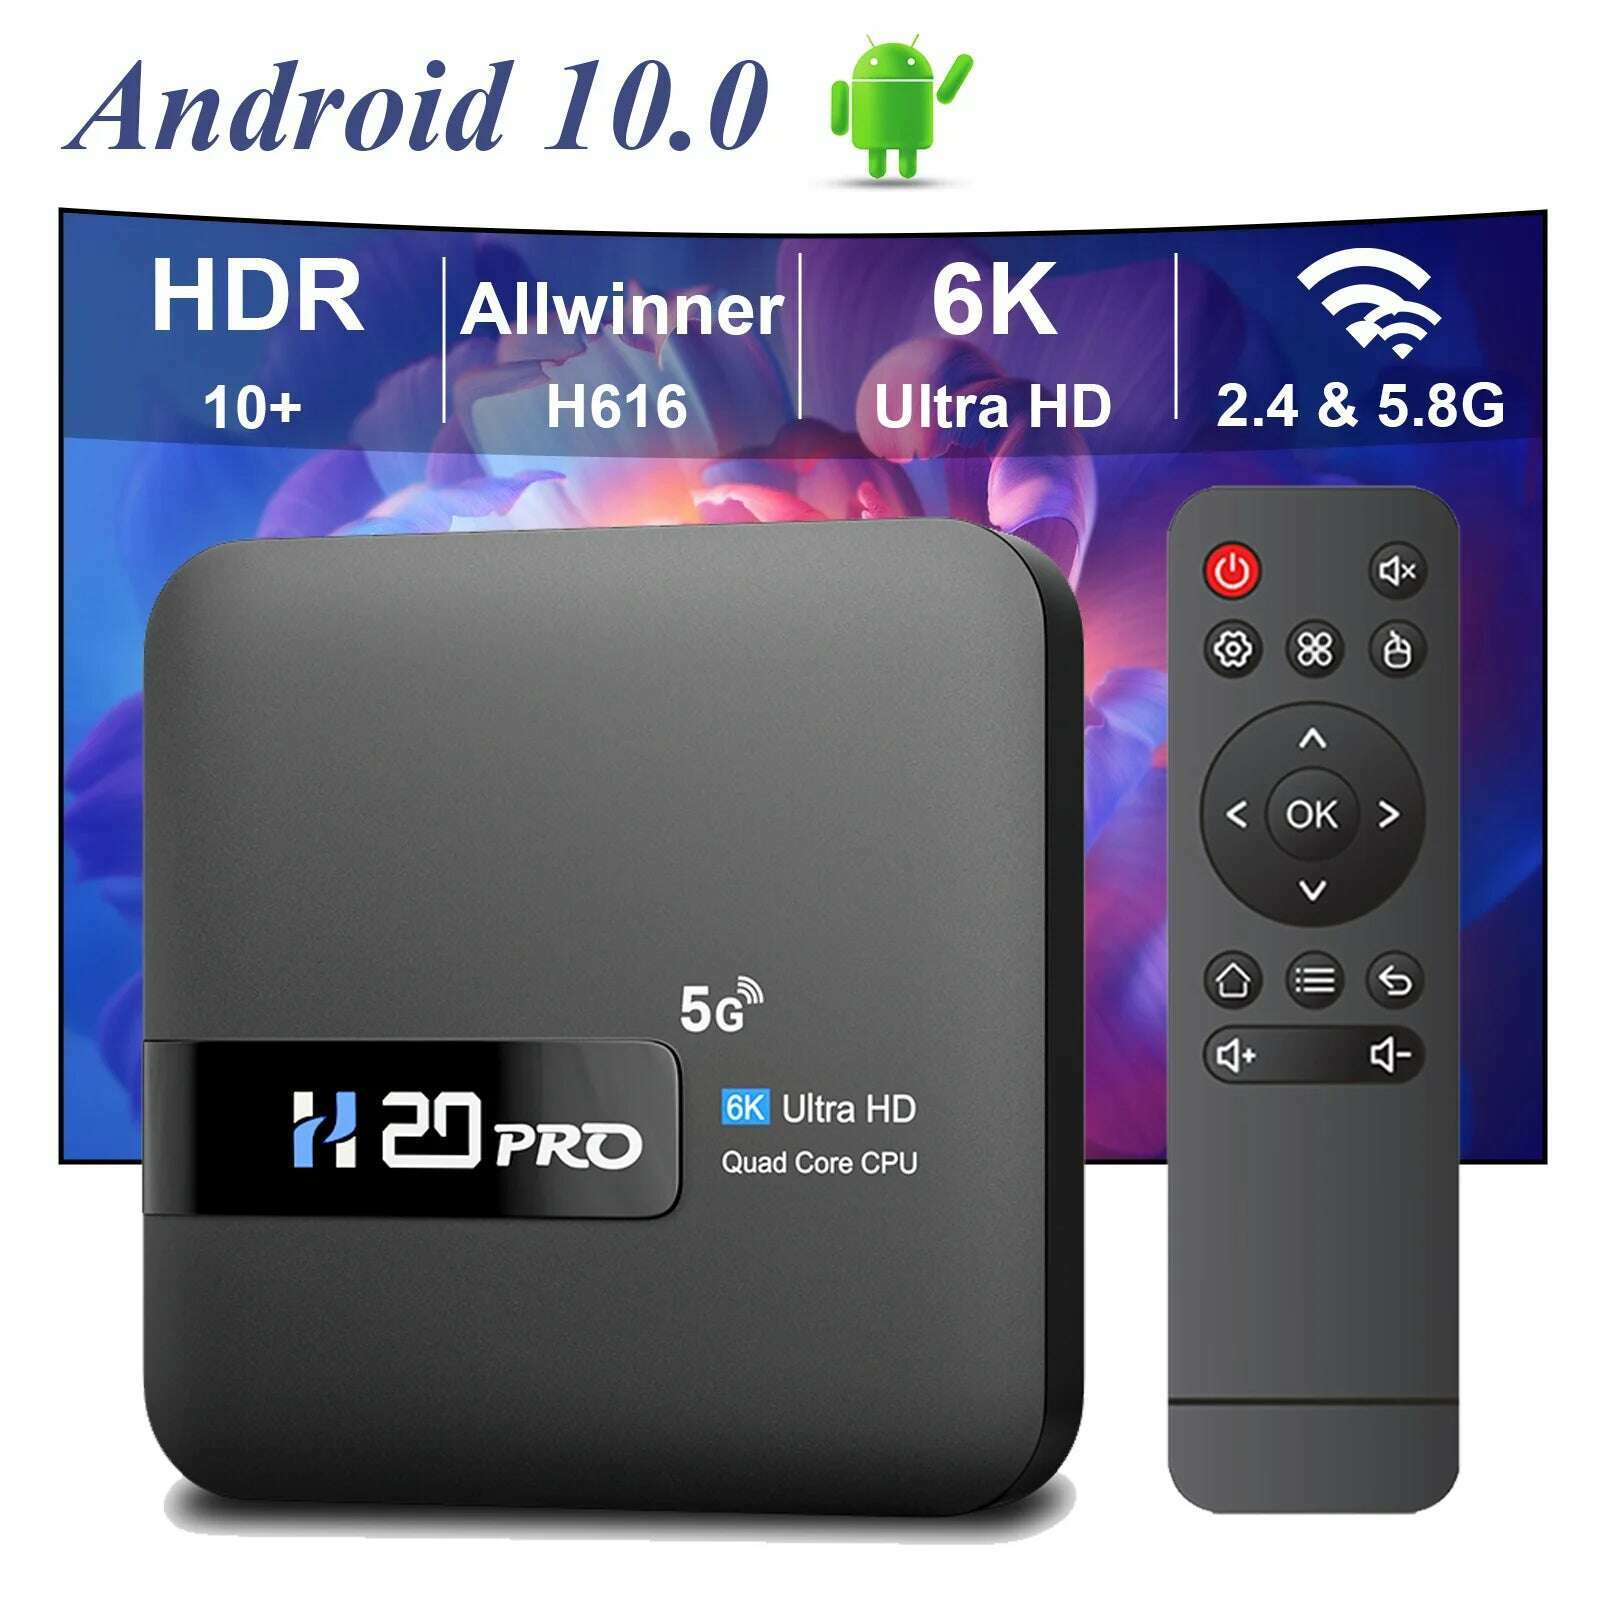 KIMLUD, H20PRO Android 10.0 TV Box Allwinner H616 With Voice Assistant 2.4&5.8G Dual Wifi 100LAN Support 1080P Video 4K 3D Media player, KIMLUD Womens Clothes